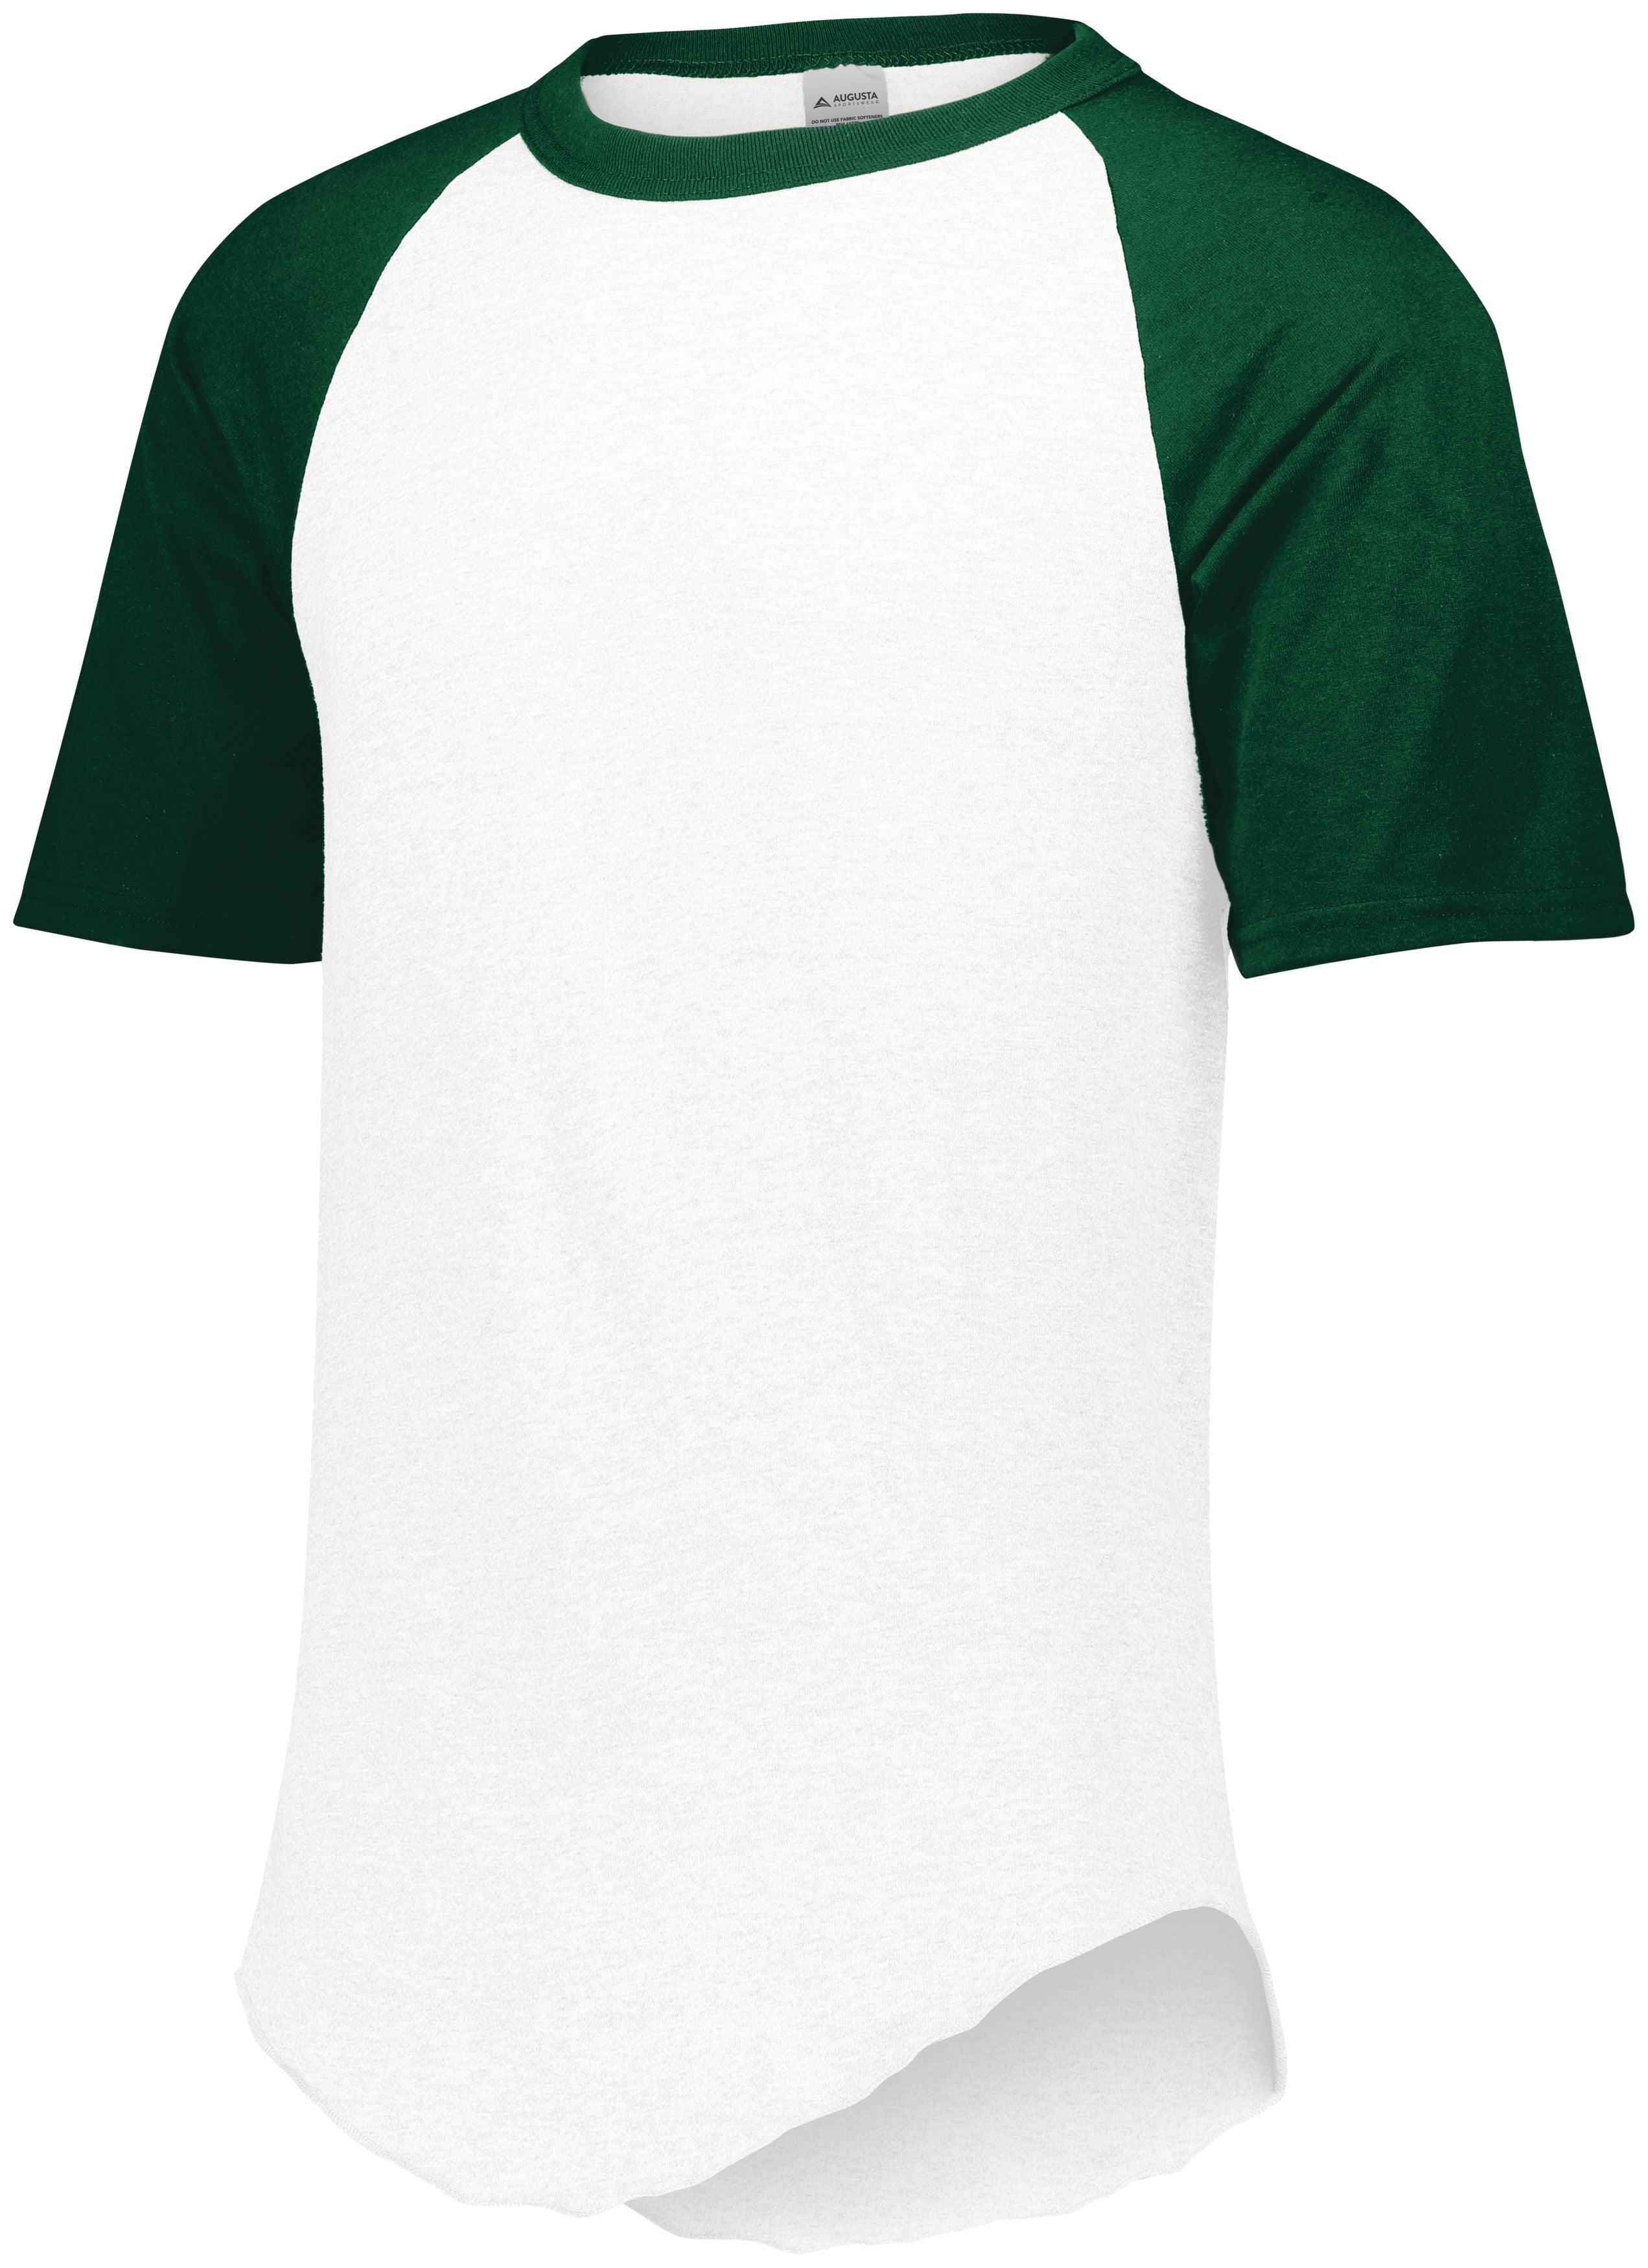 Augusta Sportswear Short Sleeve Baseball Jersey in White/Dark Green  -Part of the Adult, Adult-Jersey, Augusta-Products, Baseball, Shirts, All-Sports, All-Sports-1 product lines at KanaleyCreations.com